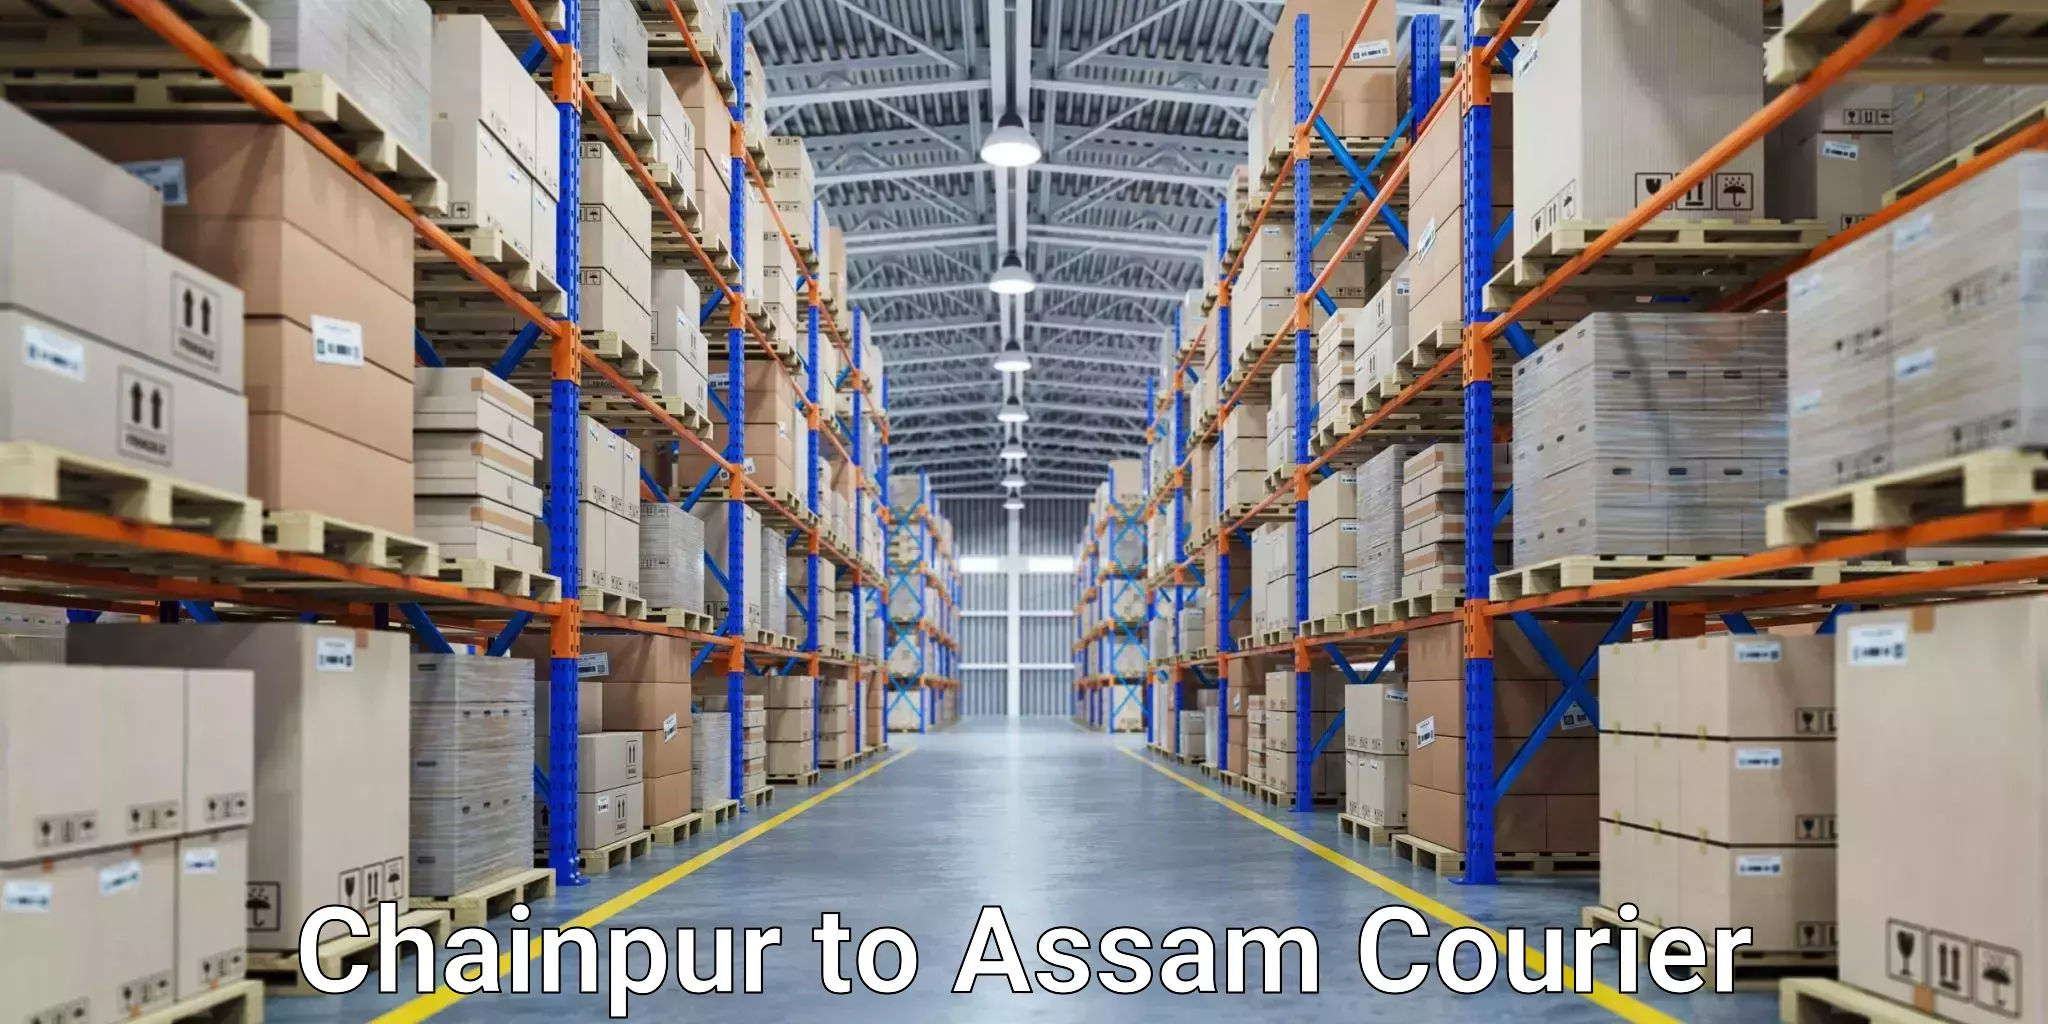 Affordable parcel service Chainpur to Lala Assam